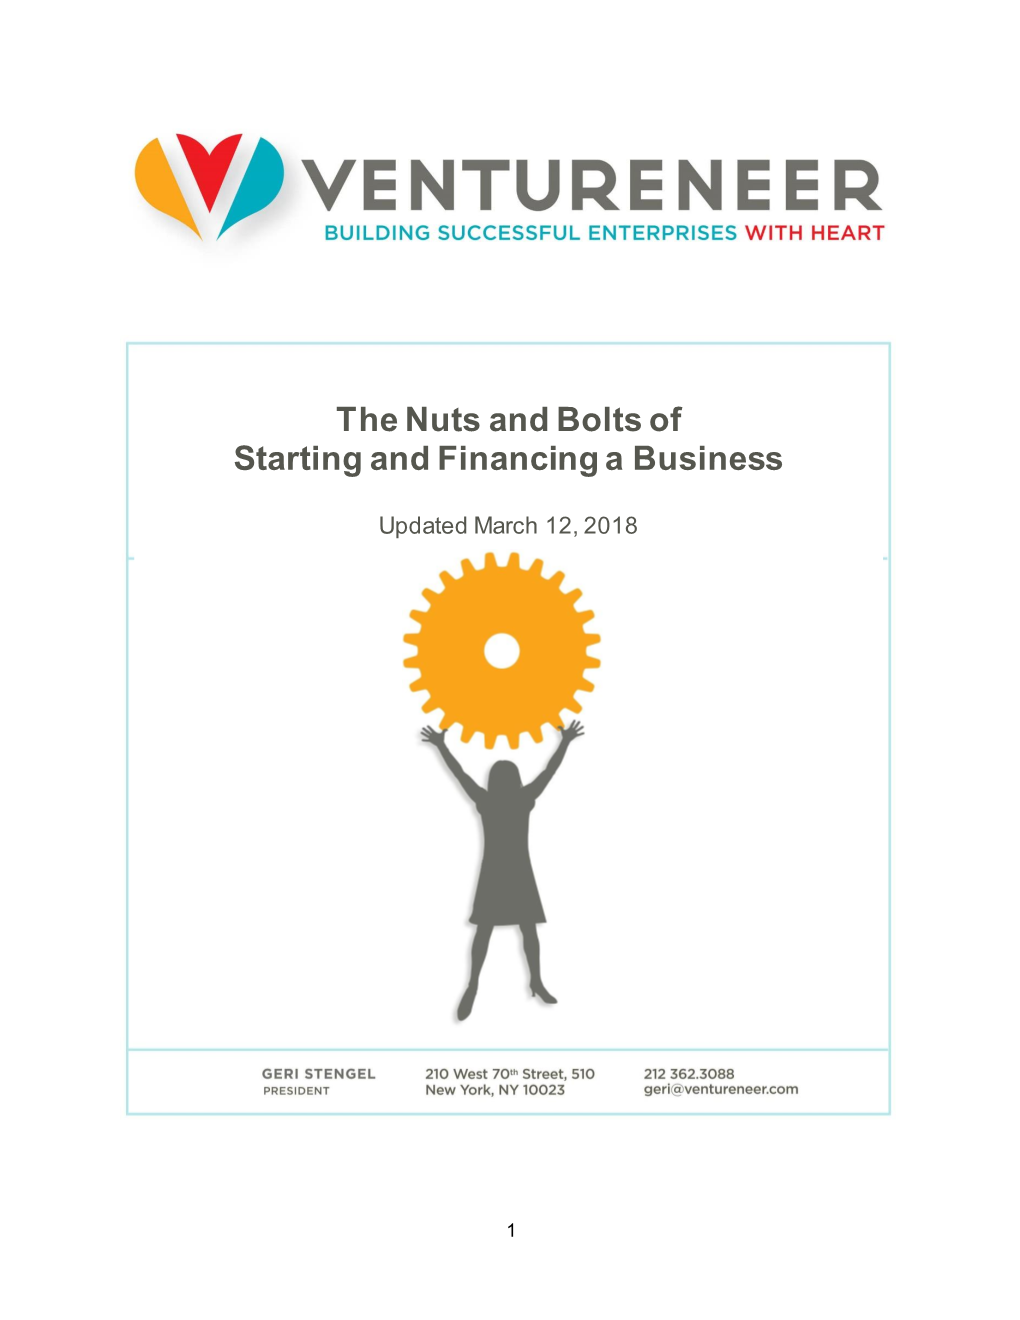 The Nuts and Bolts of Starting and Financing a Business